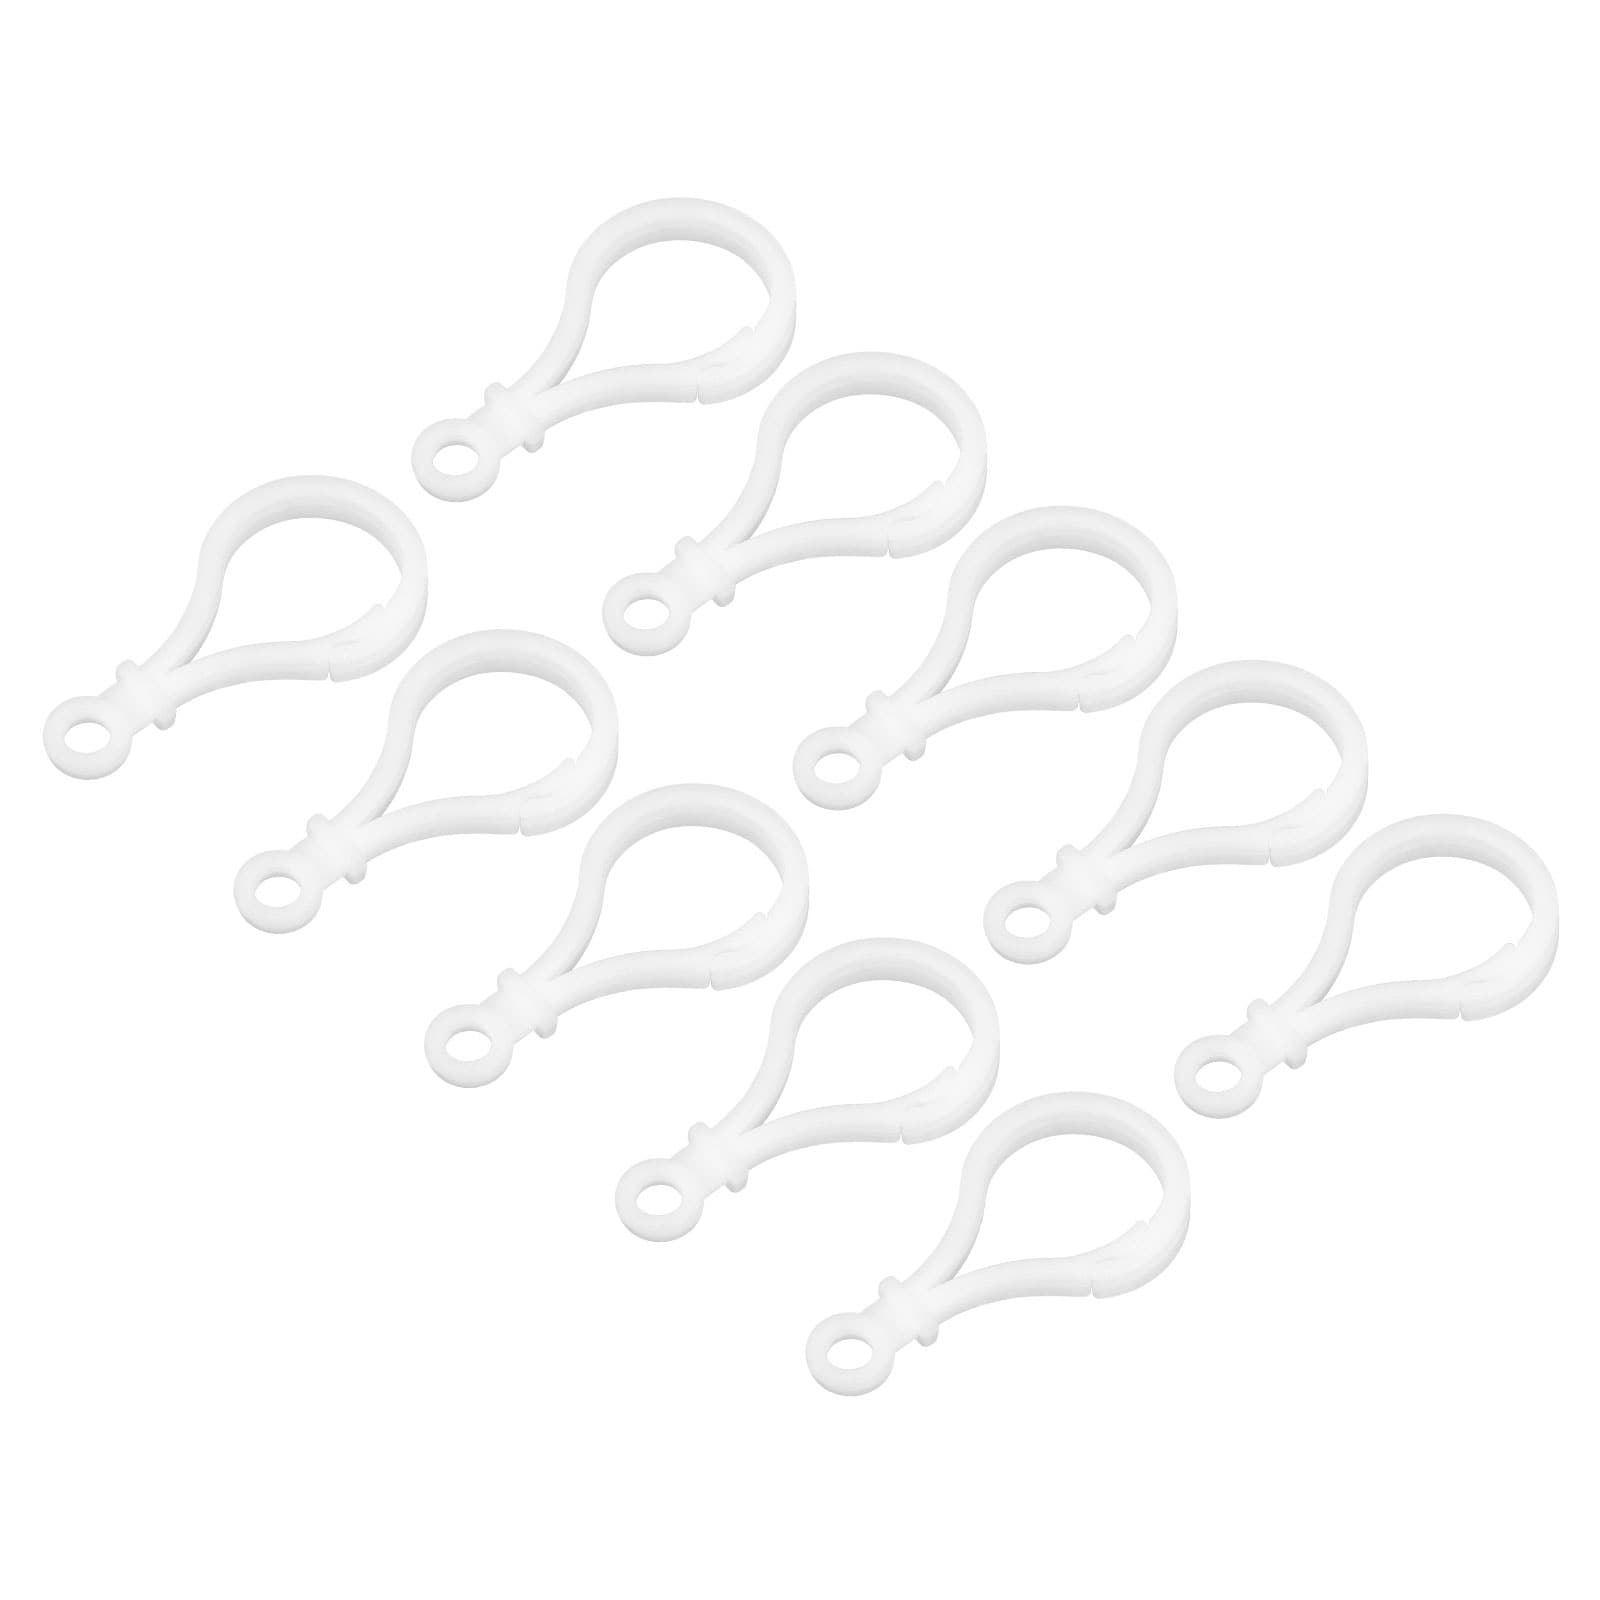 https://ak1.ostkcdn.com/images/products/is/images/direct/35af86c3ea232a1d005f1ebd9968836adc7f302d/Plastic-Lobster-Clasps%2C-Claw-Snap-Hooks-for-Keychains-DIY-White%2C-24Pcs.jpg